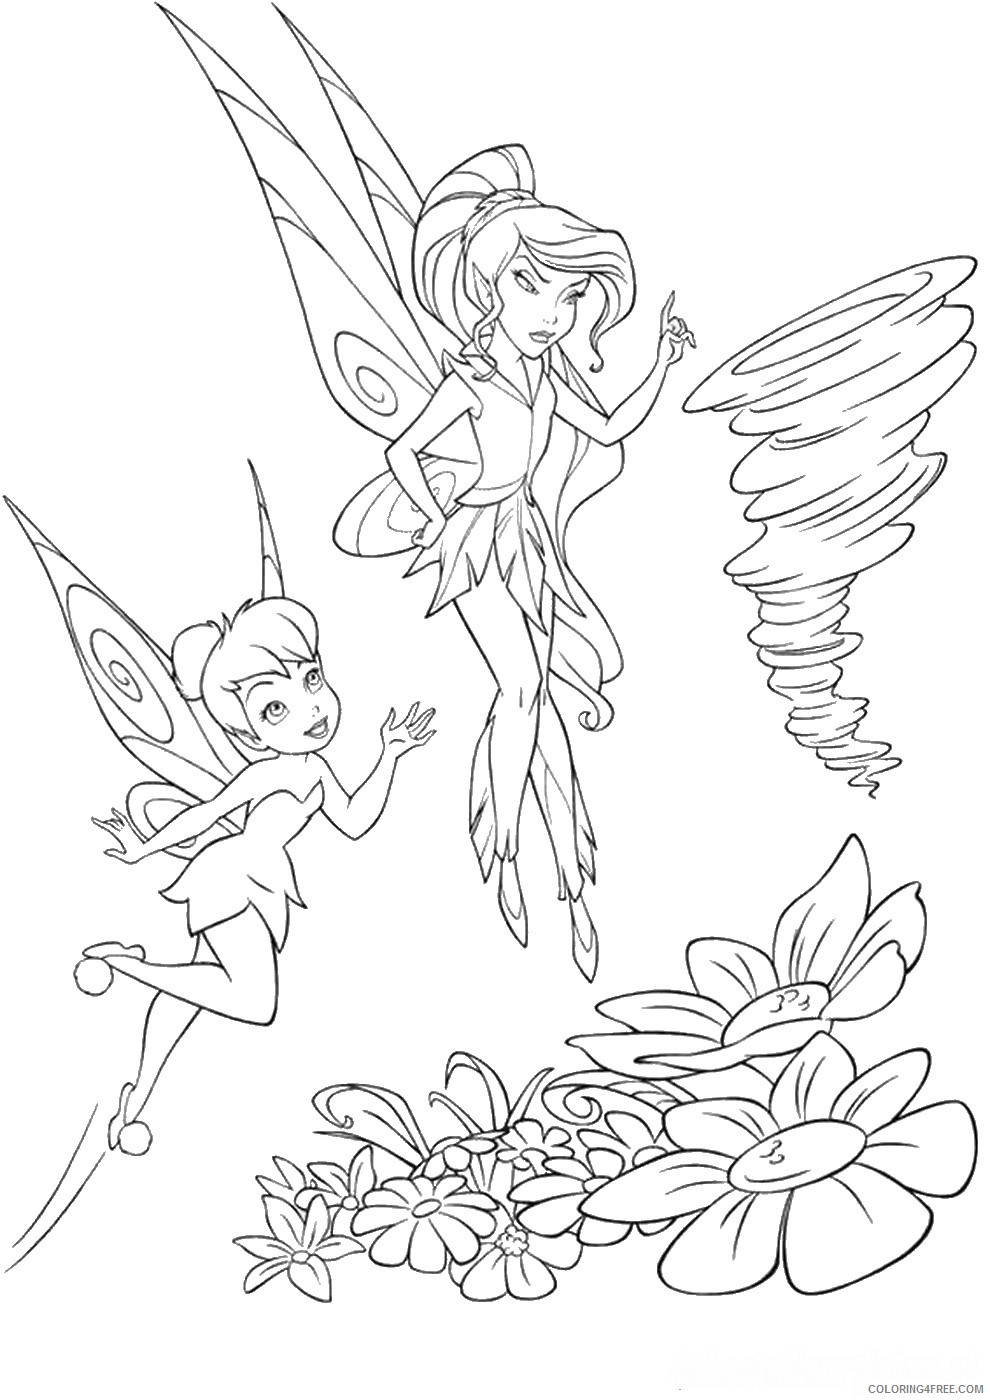 Tinker Bell Coloring Pages Cartoons tinkerbell_cl_09 Printable 2020 6616 Coloring4free